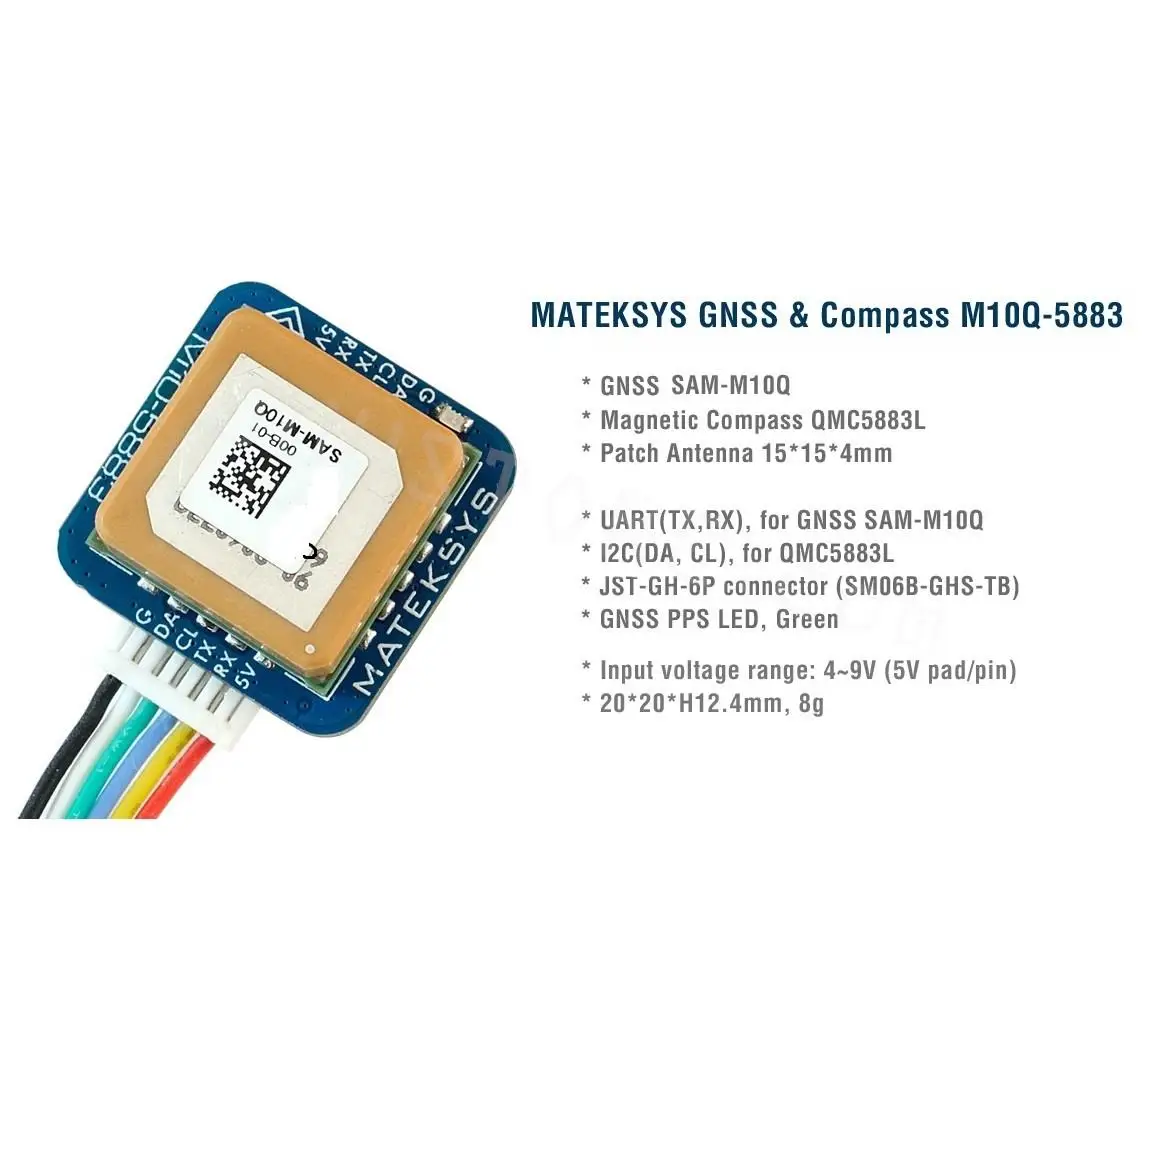 New Matek Systems M8q-5883 72 Channel Ublox Sam-m8q Gps & Qmc5883l With  Compass Module For Rc Fpv Racing Drone - Parts & Accs - AliExpress